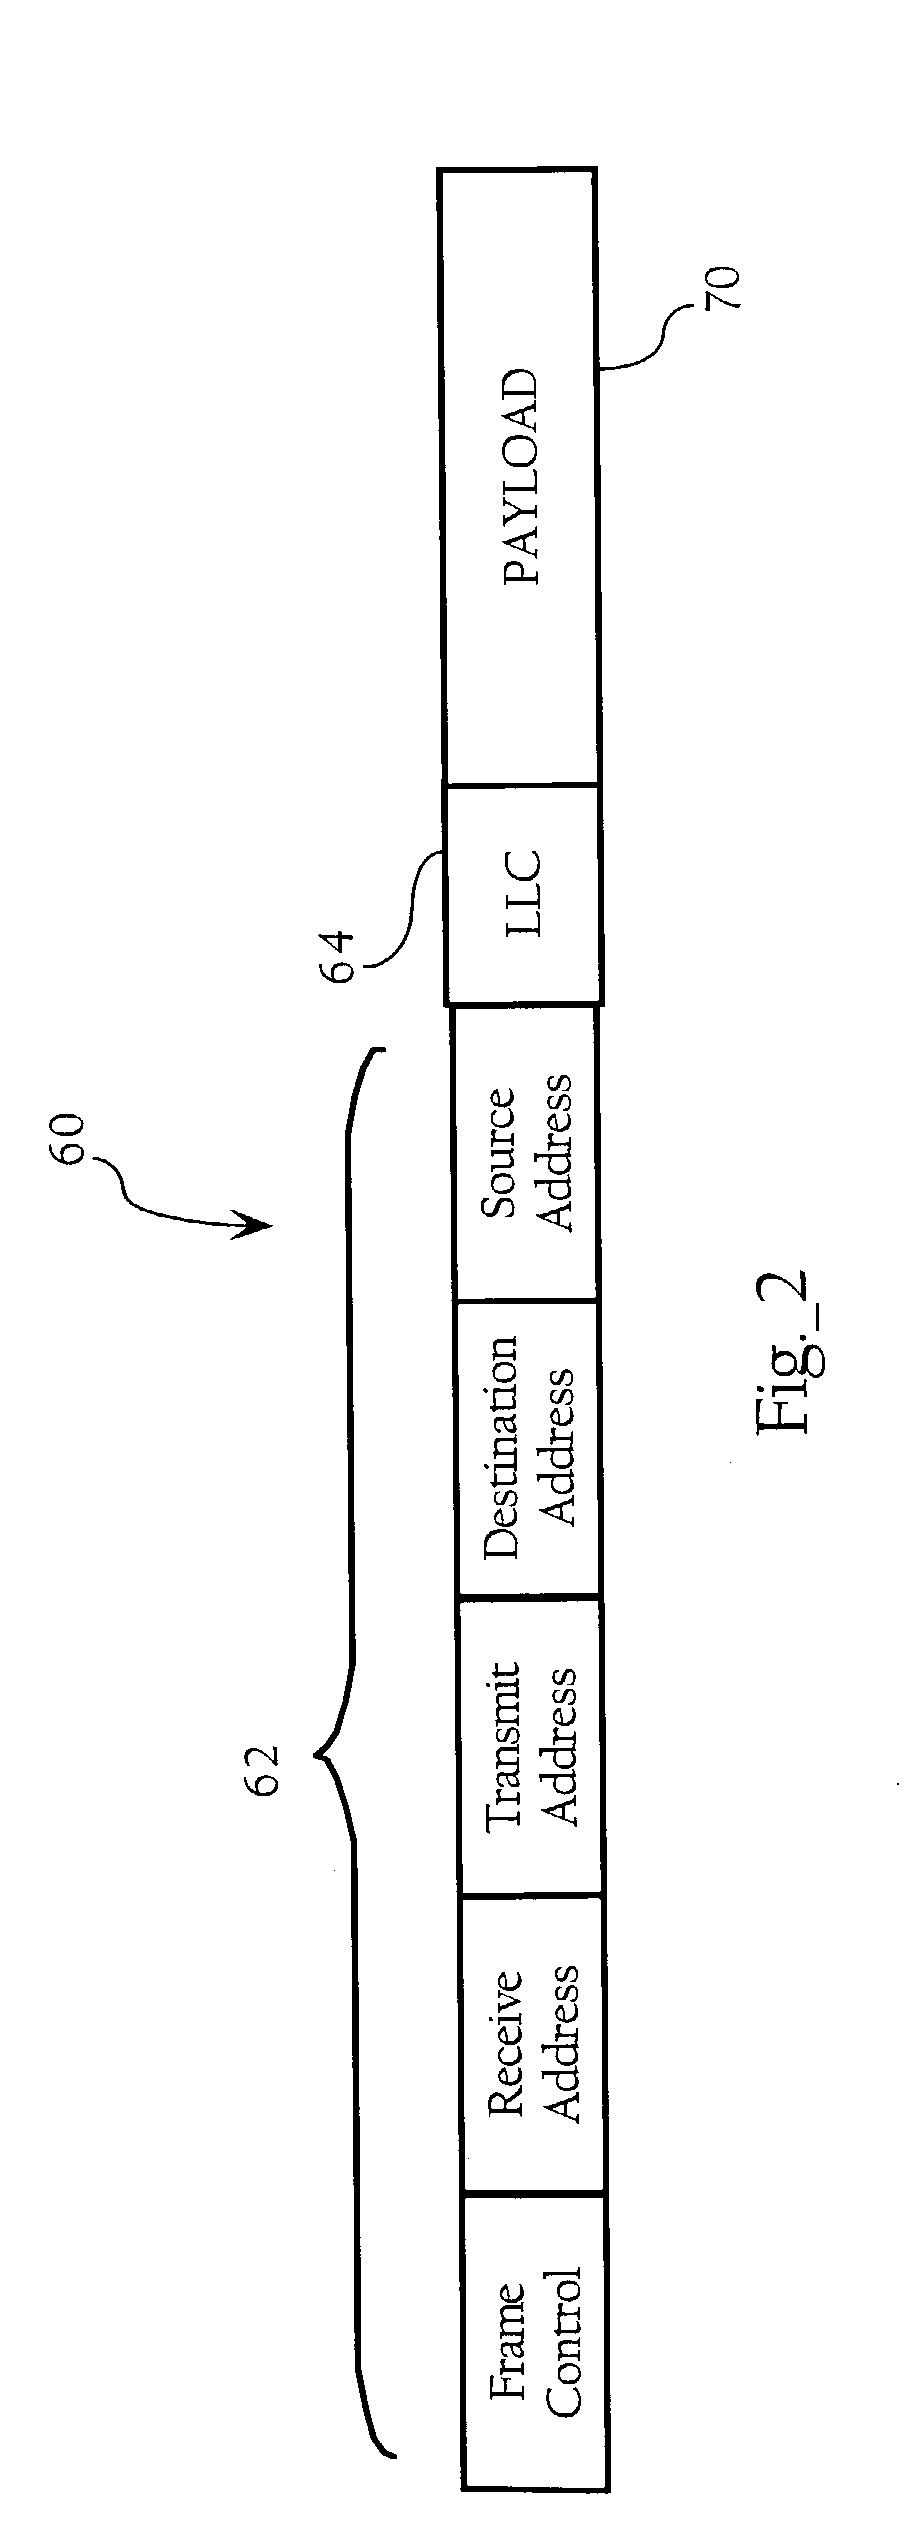 Wireless network infrastructure including wireless discovery and communication mechanism